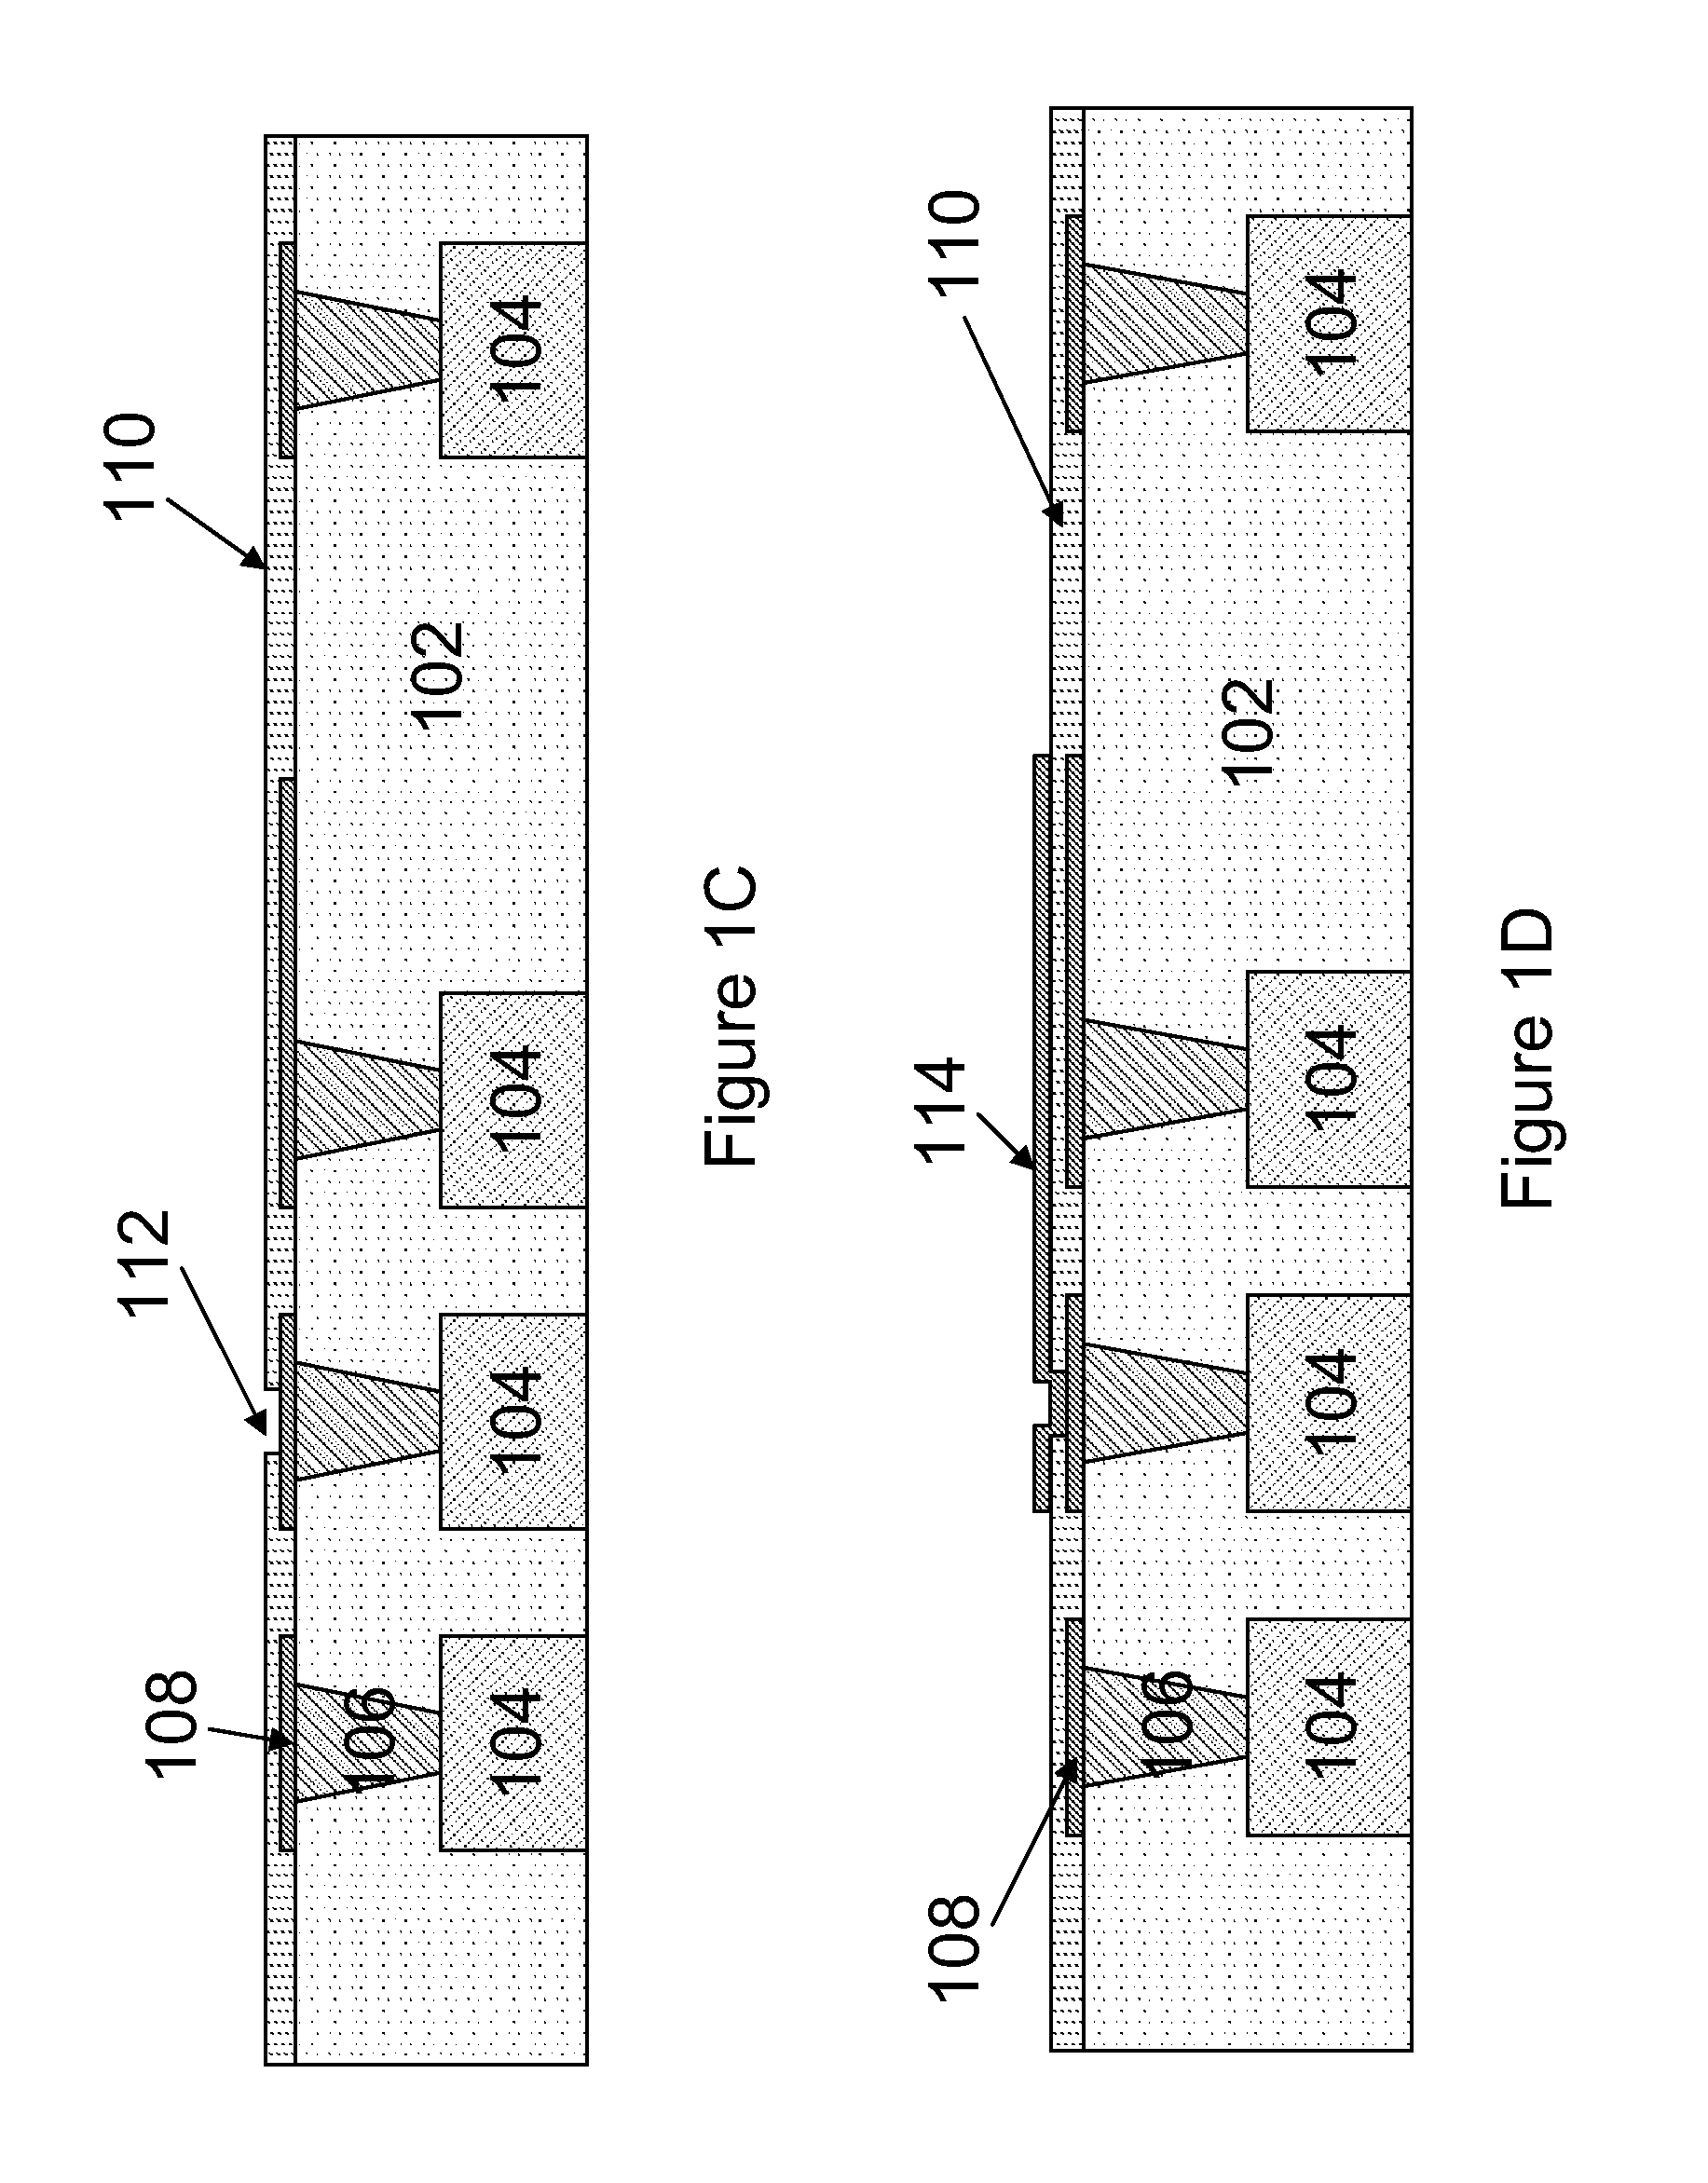 Method of using a plurality of smaller MEMS devices to replace a larger MEMS device